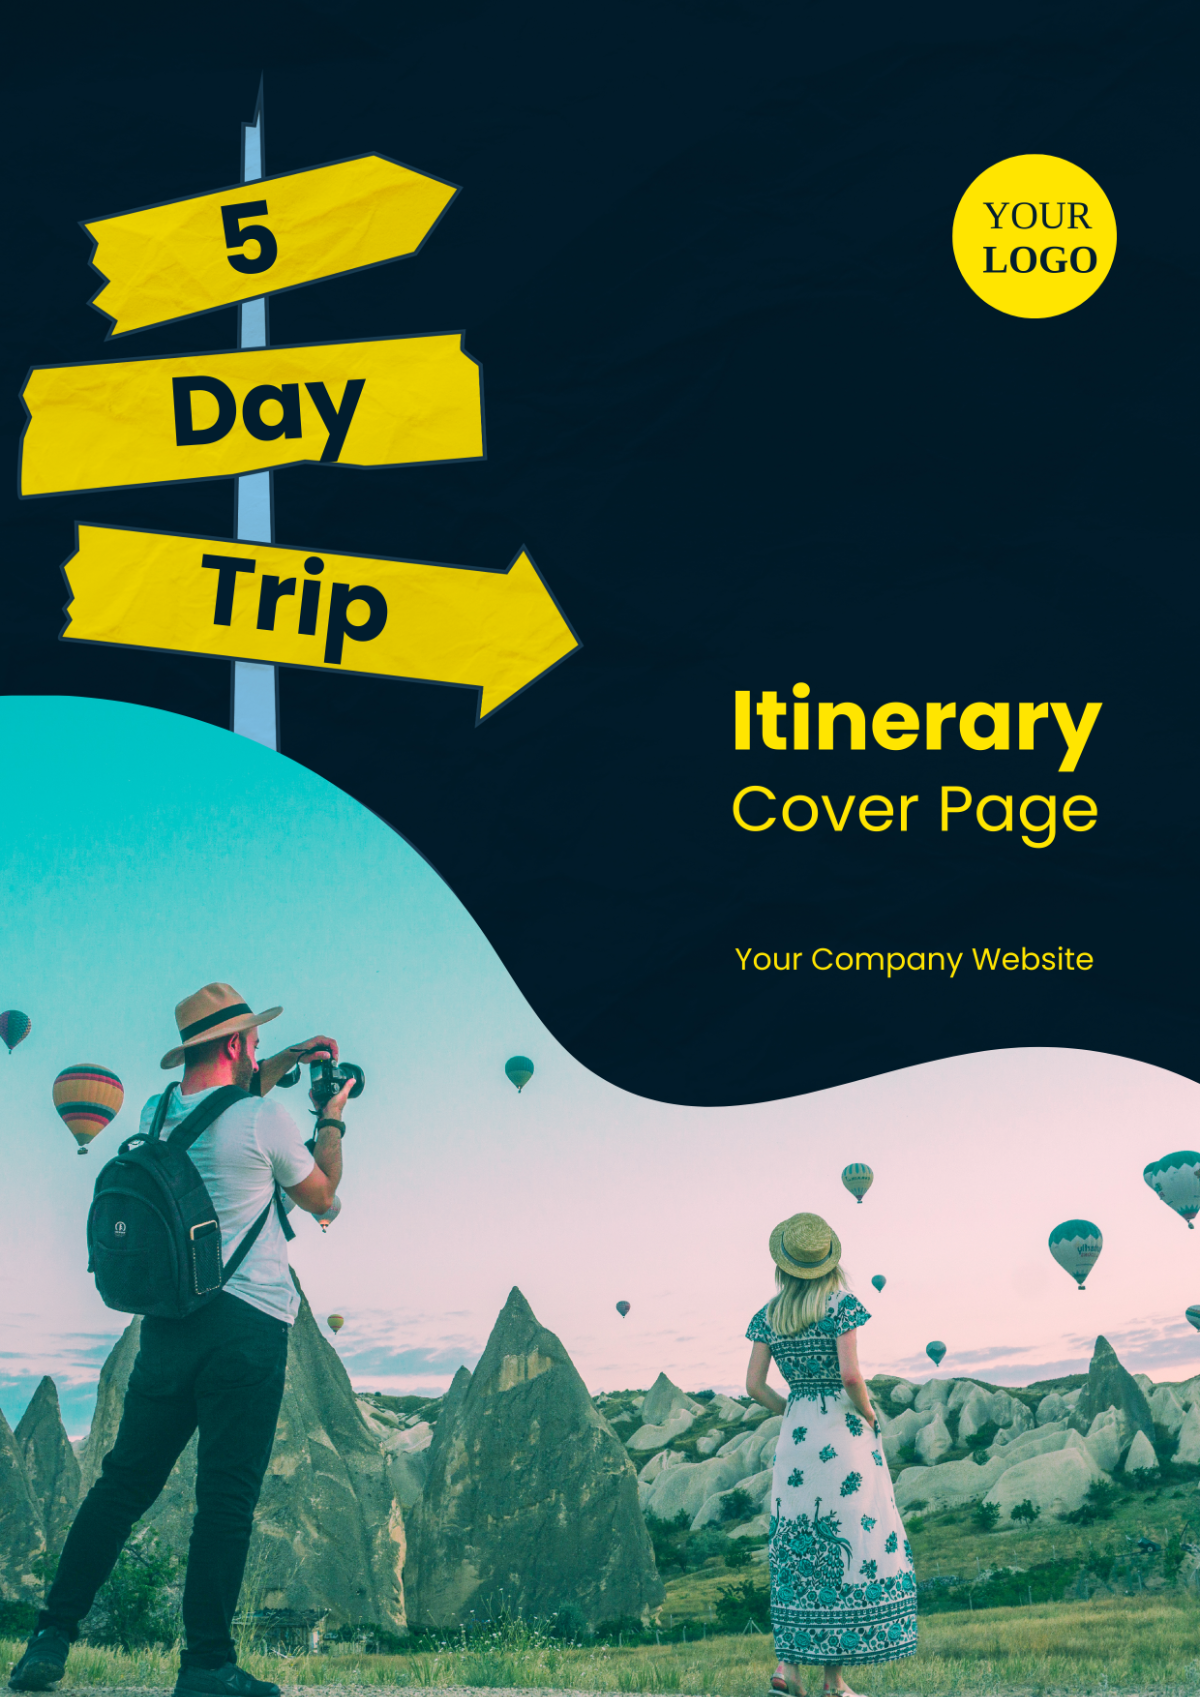 Free 5 Day Trip Itinerary Cover Page Template